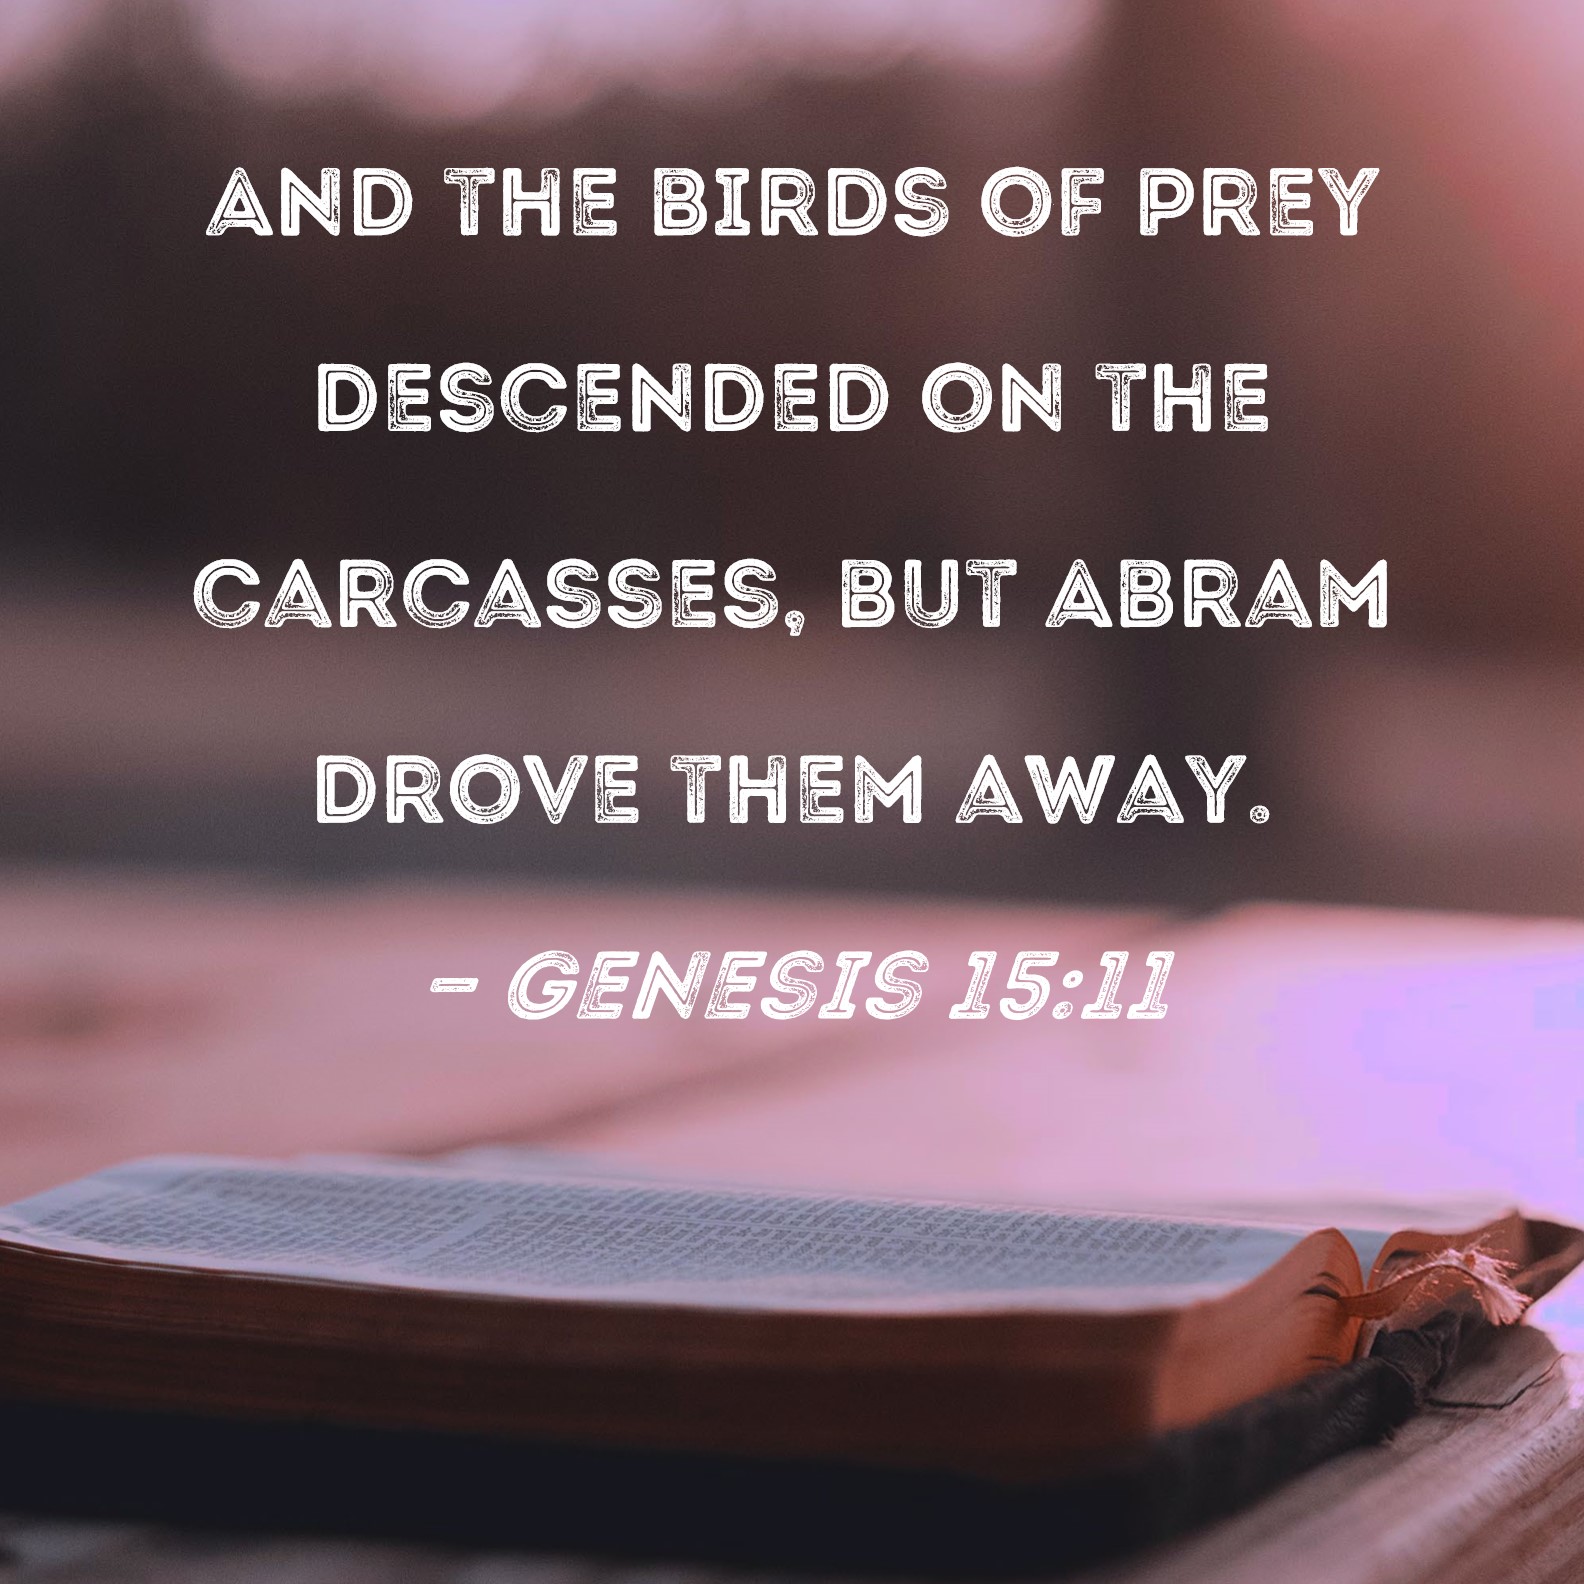 genesis-15-11-and-the-birds-of-prey-descended-on-the-carcasses-but